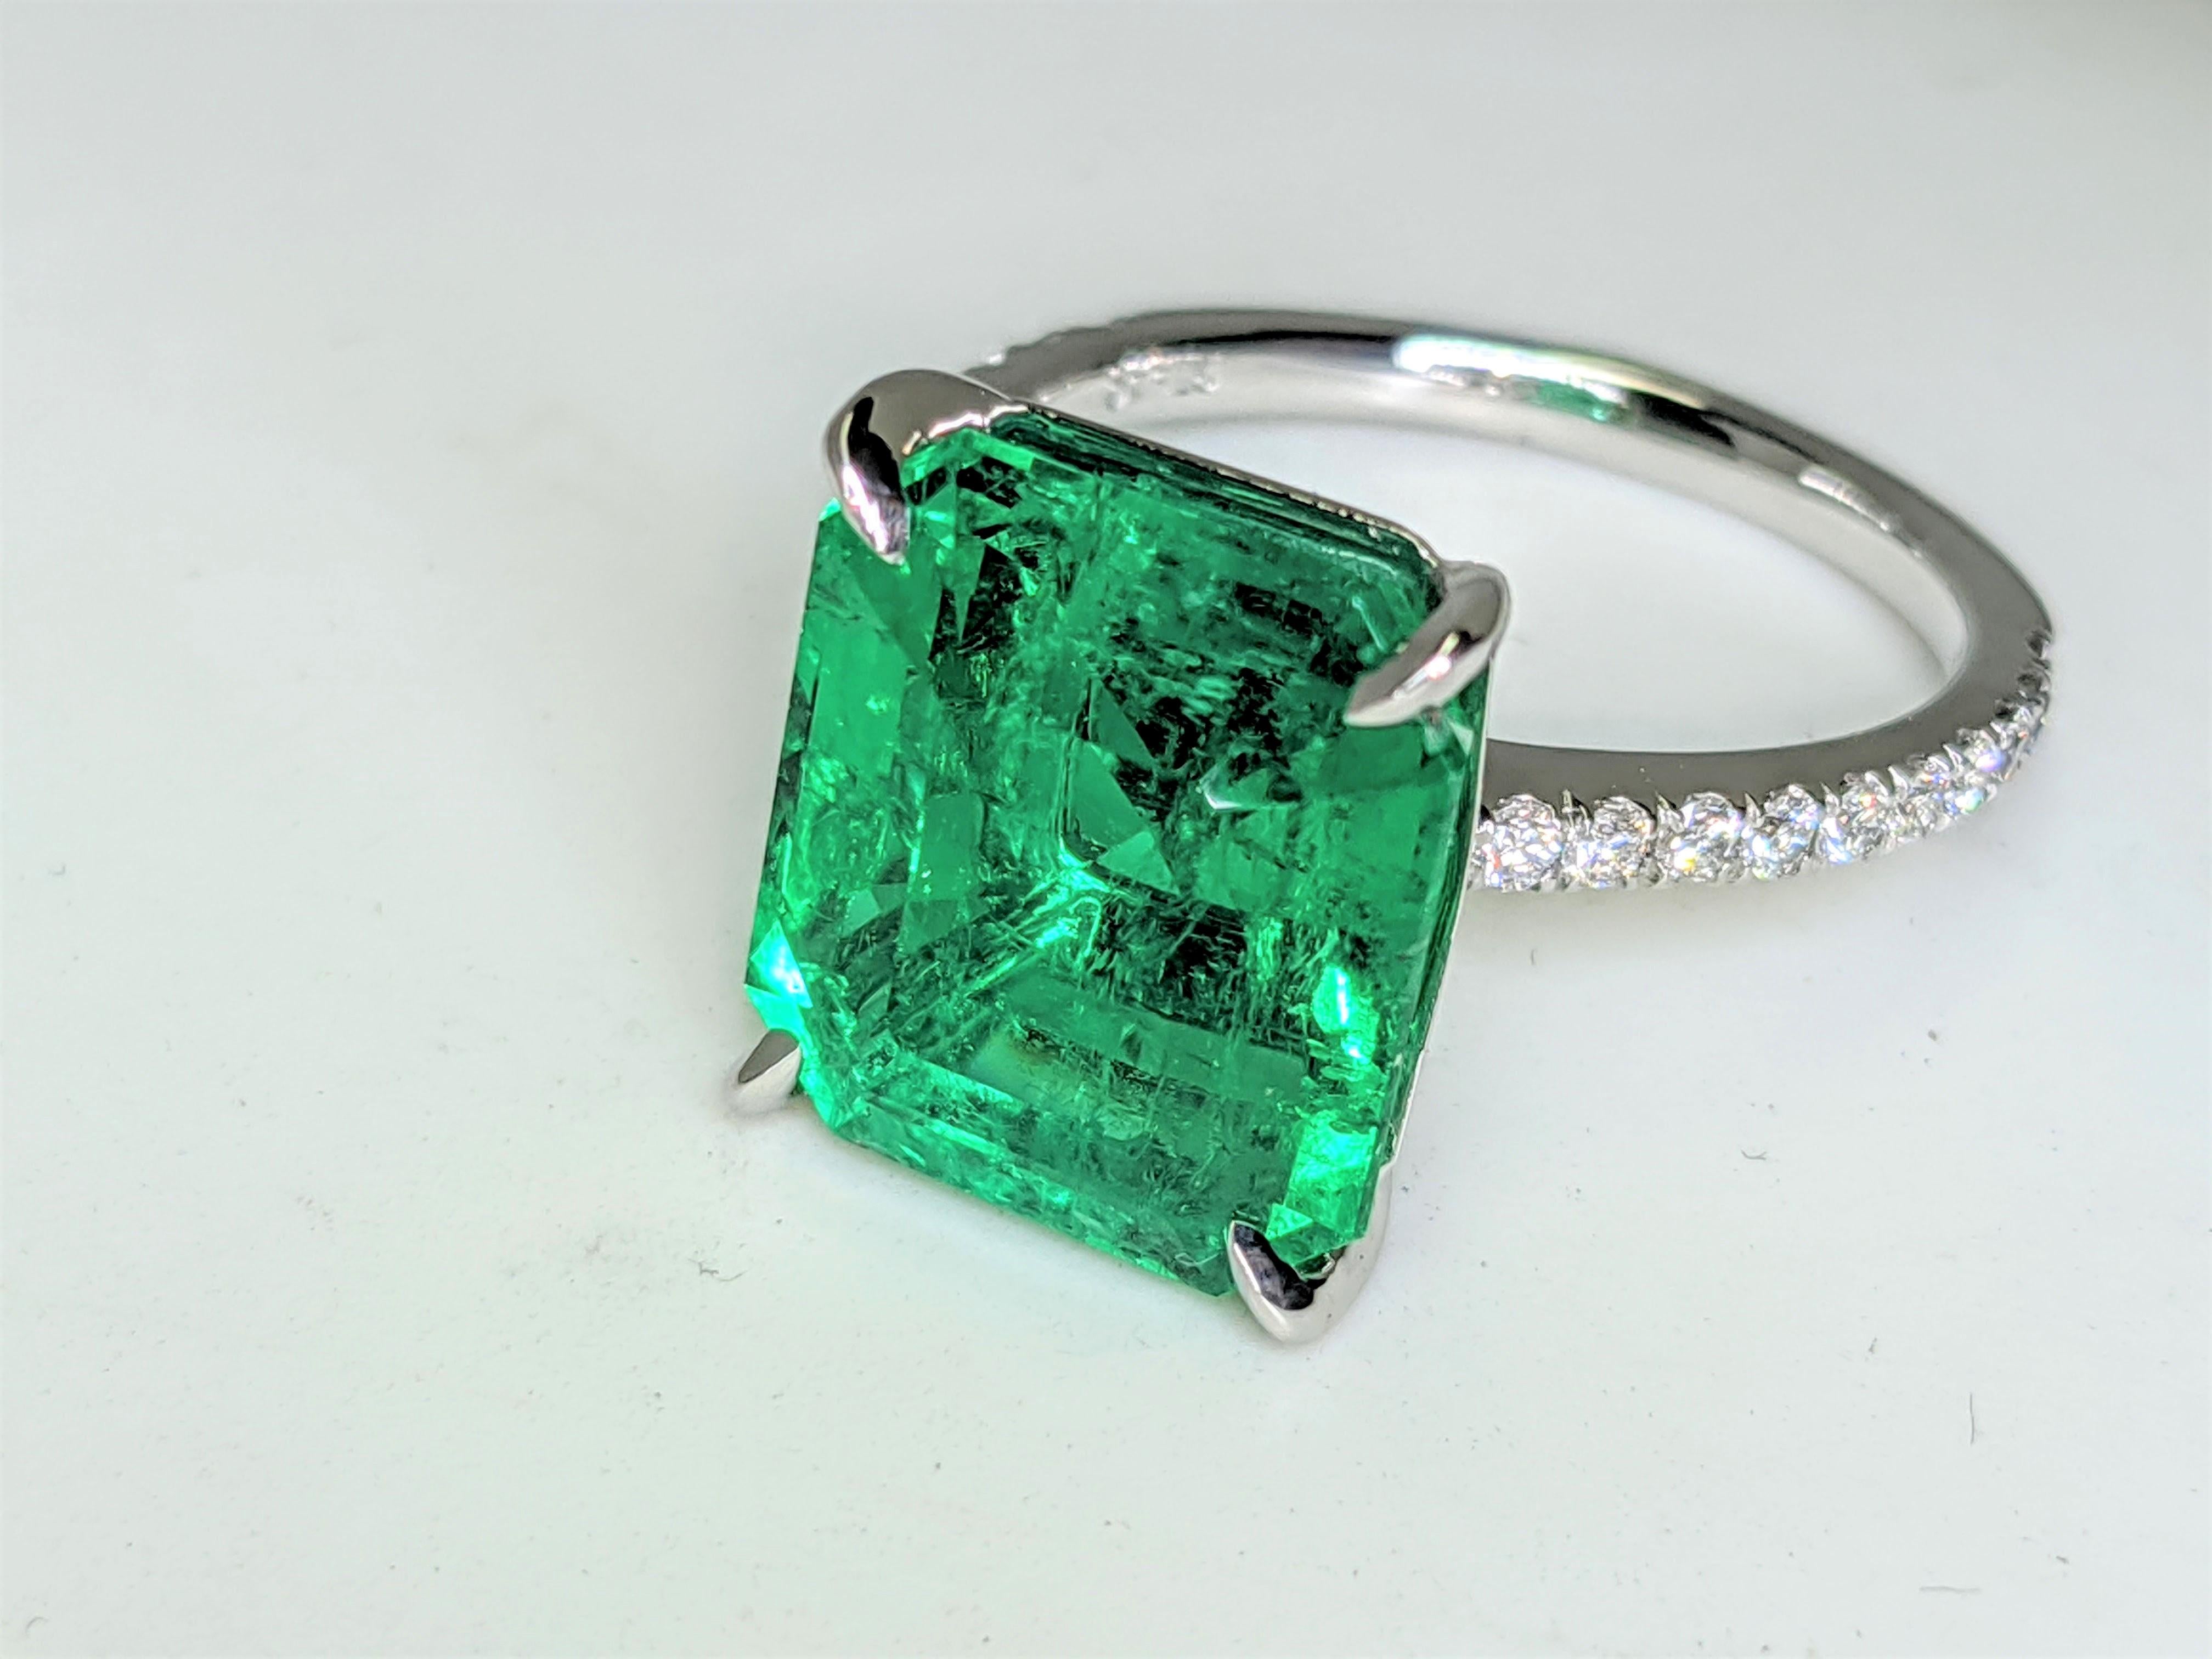 GRS Certified 6.31 carat Colombian emerald cut Emerald, very high quality color,  embellished by a pave' of bright diamonds of approximately total carat weight of 0.32 carat, set in a hand crafted Platinum 950 ring, manufactured with the best